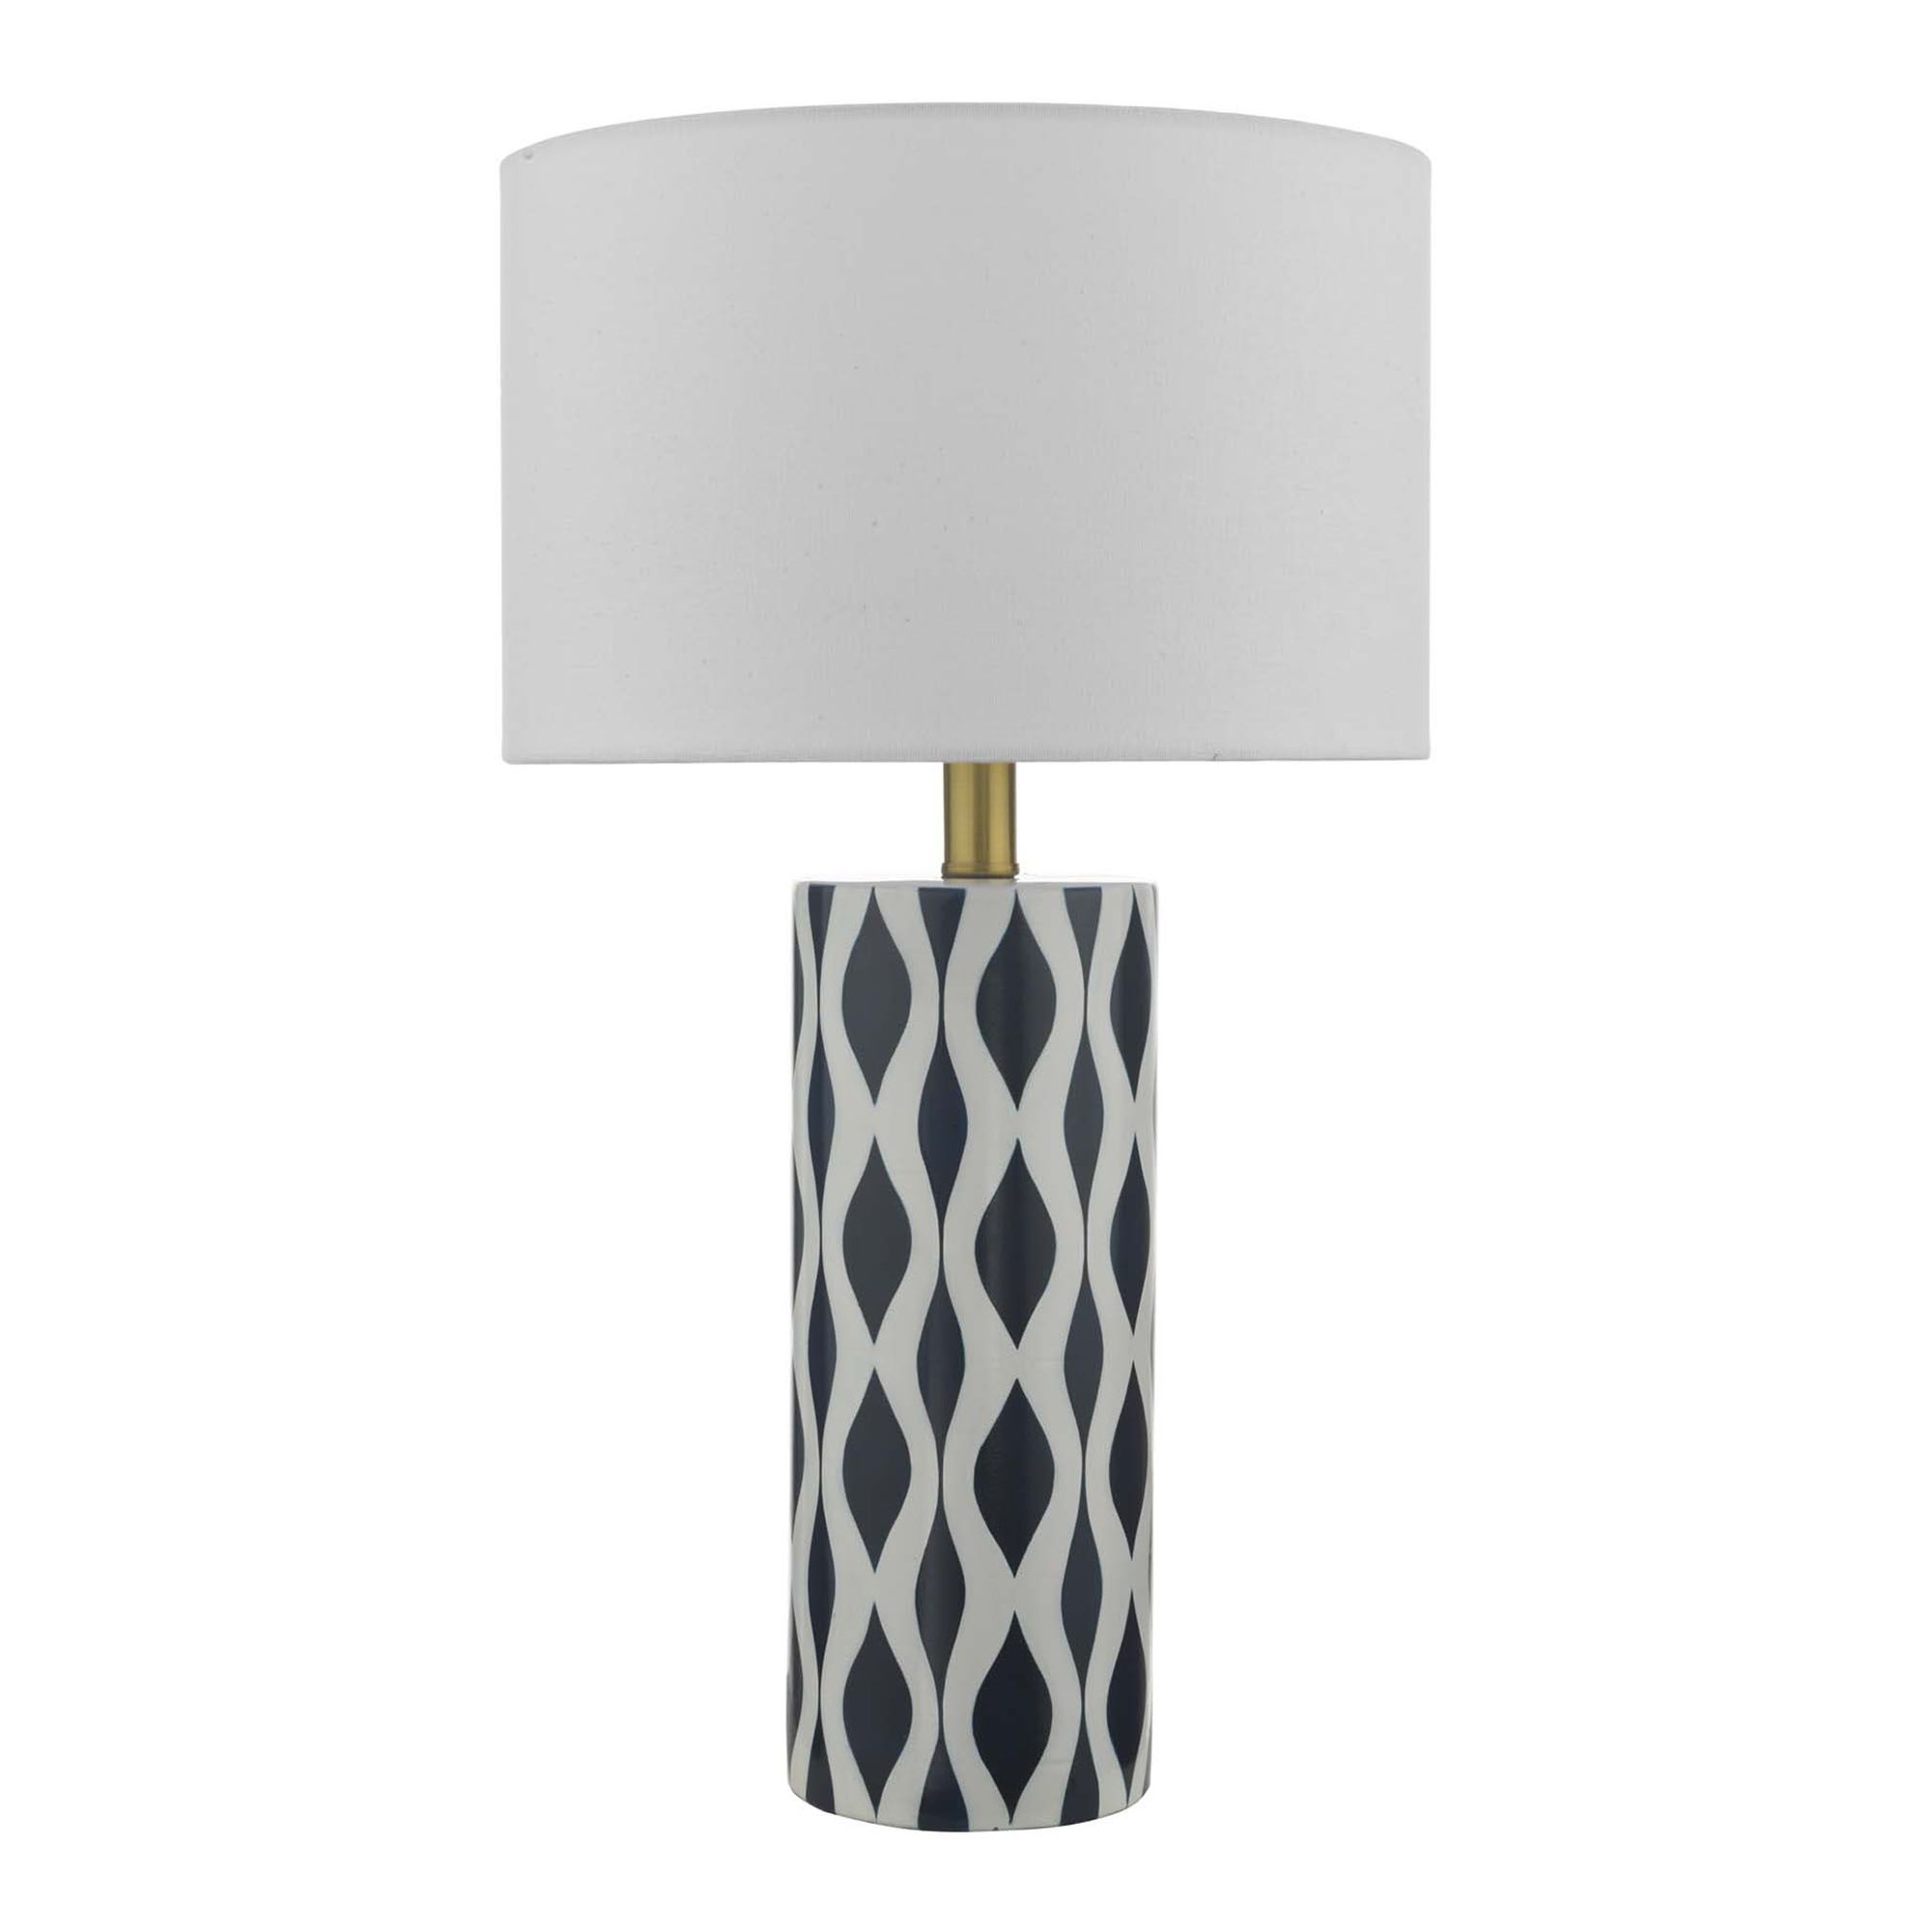 Weylin Table Lamp Blue And White, Blue And White Ceramic Table Lamps